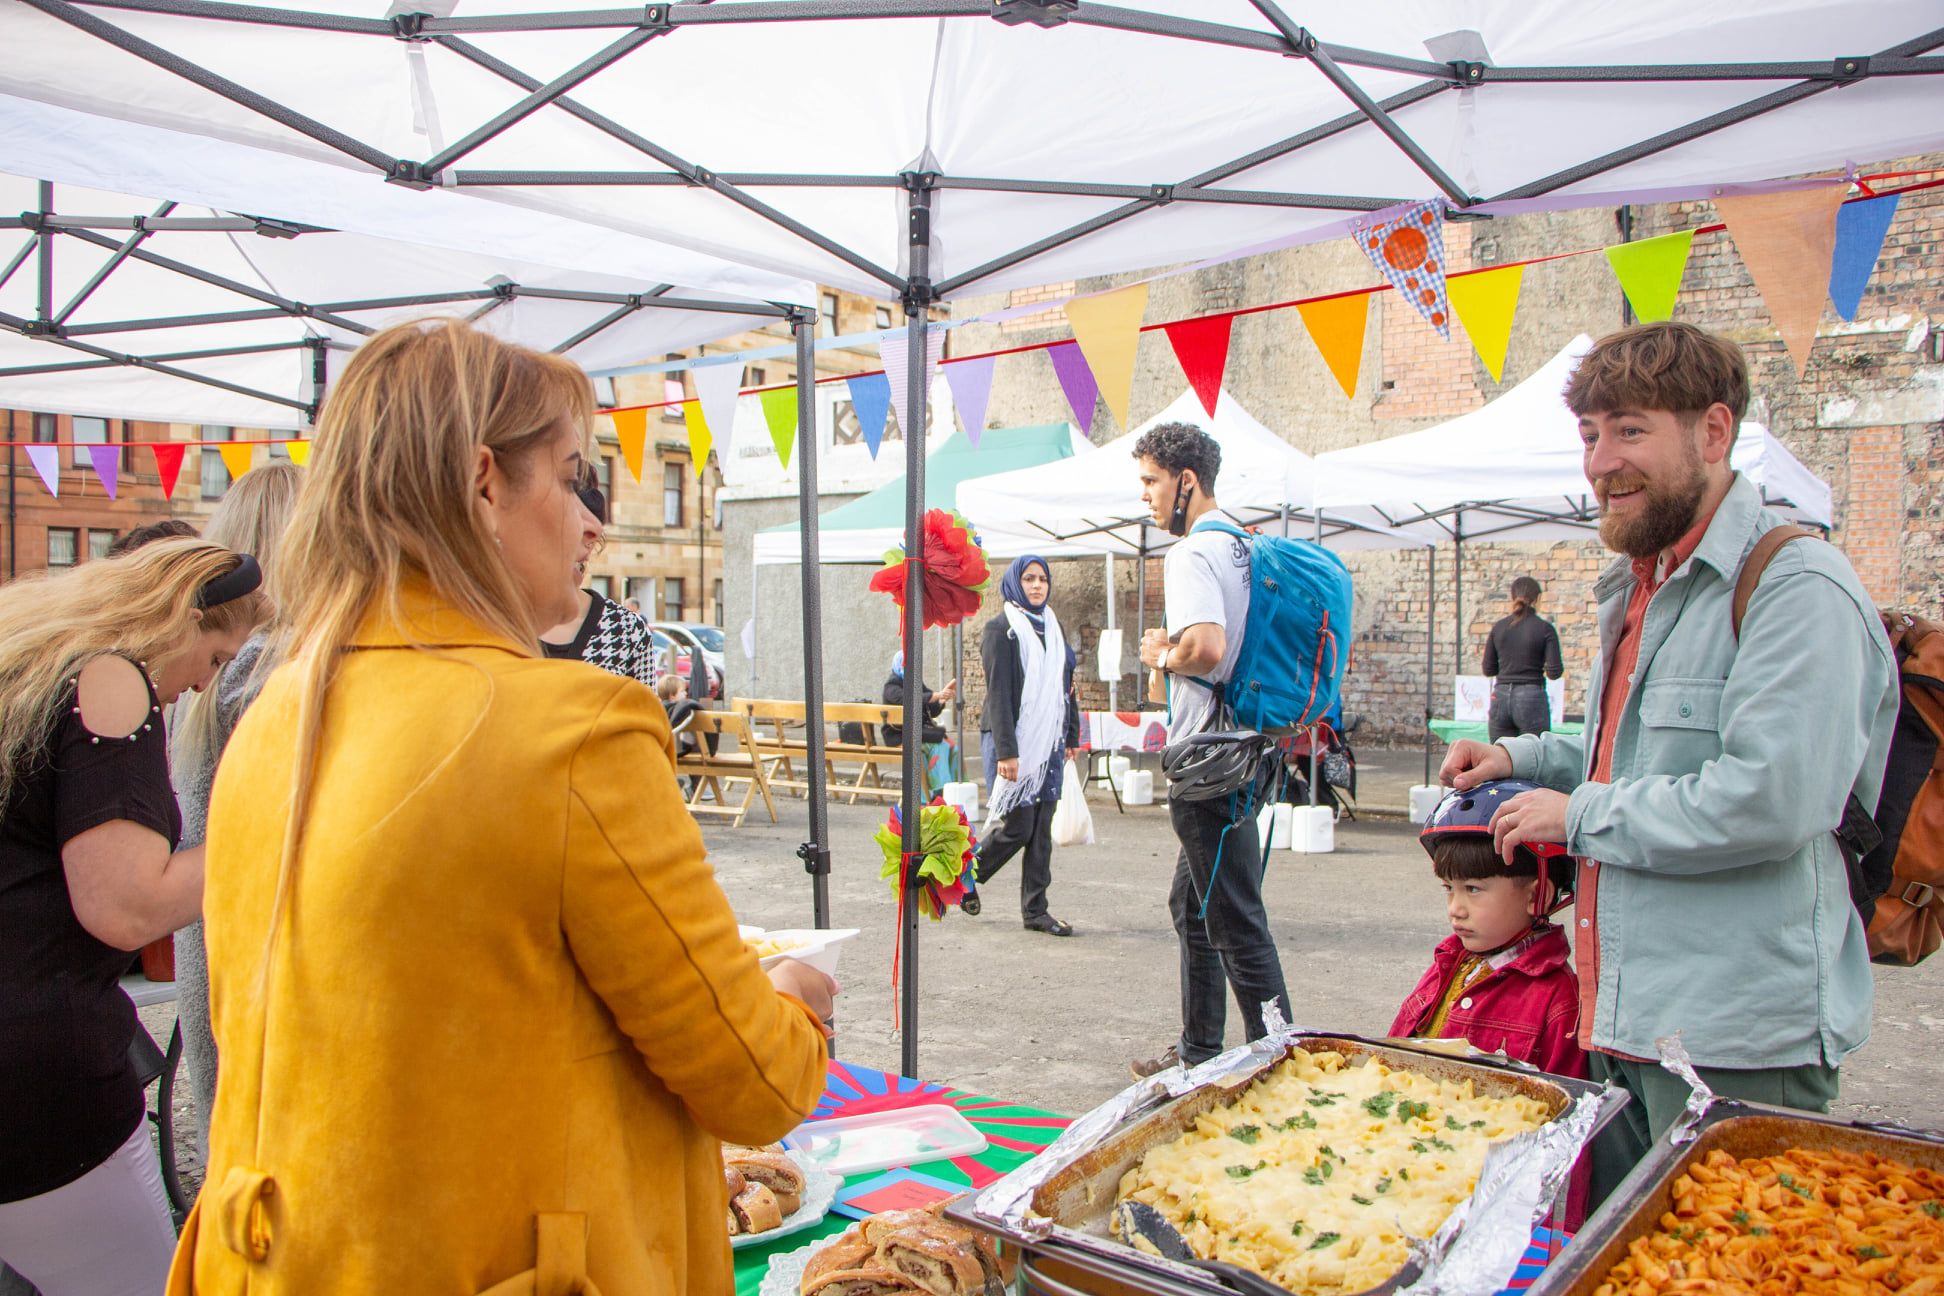 Govanhill Food Stories Community Market to celebrate culture at Govanhill International Festival